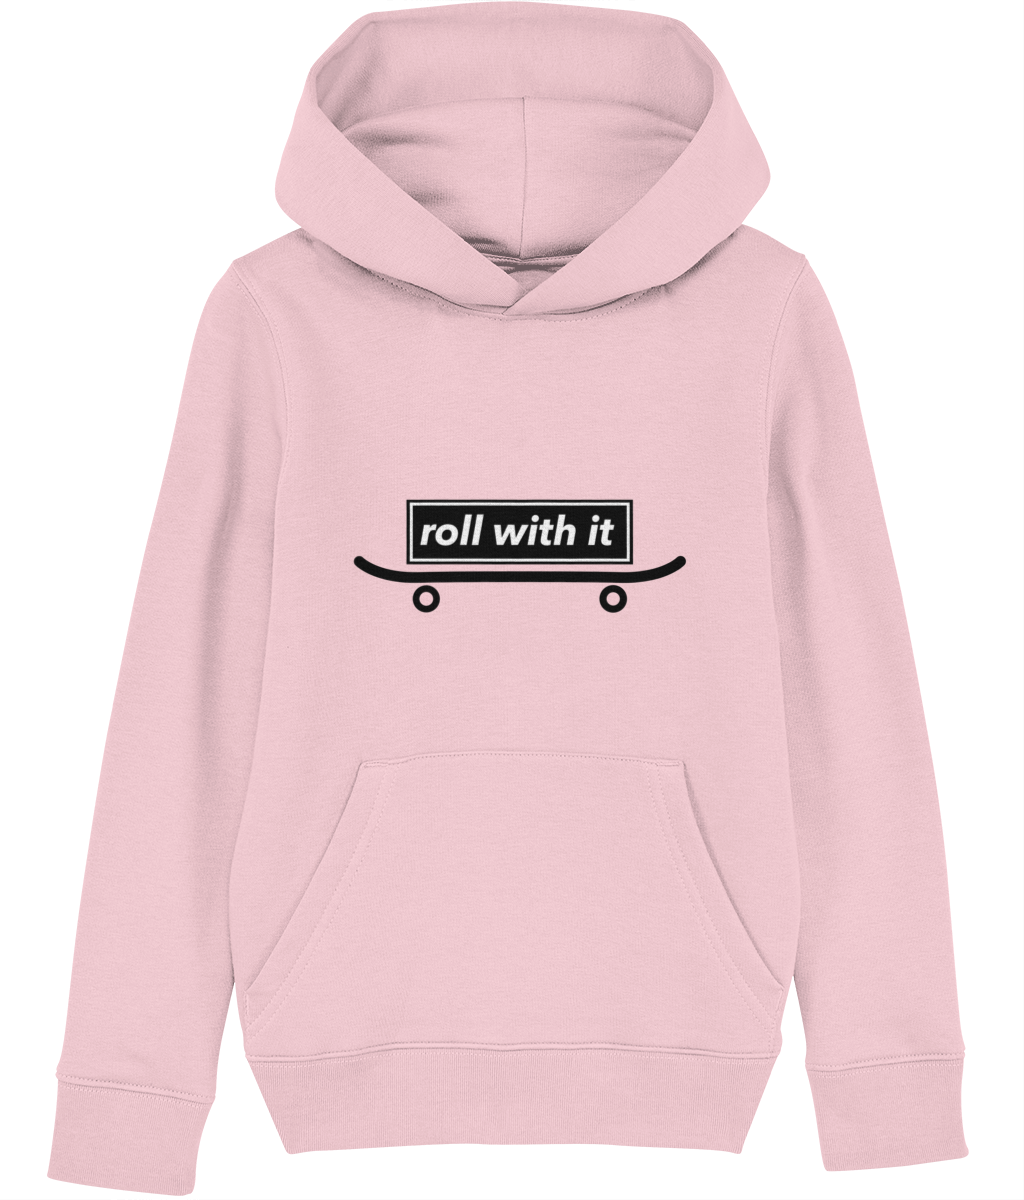 Organic Cotton Junior Hoodie, Roll With It